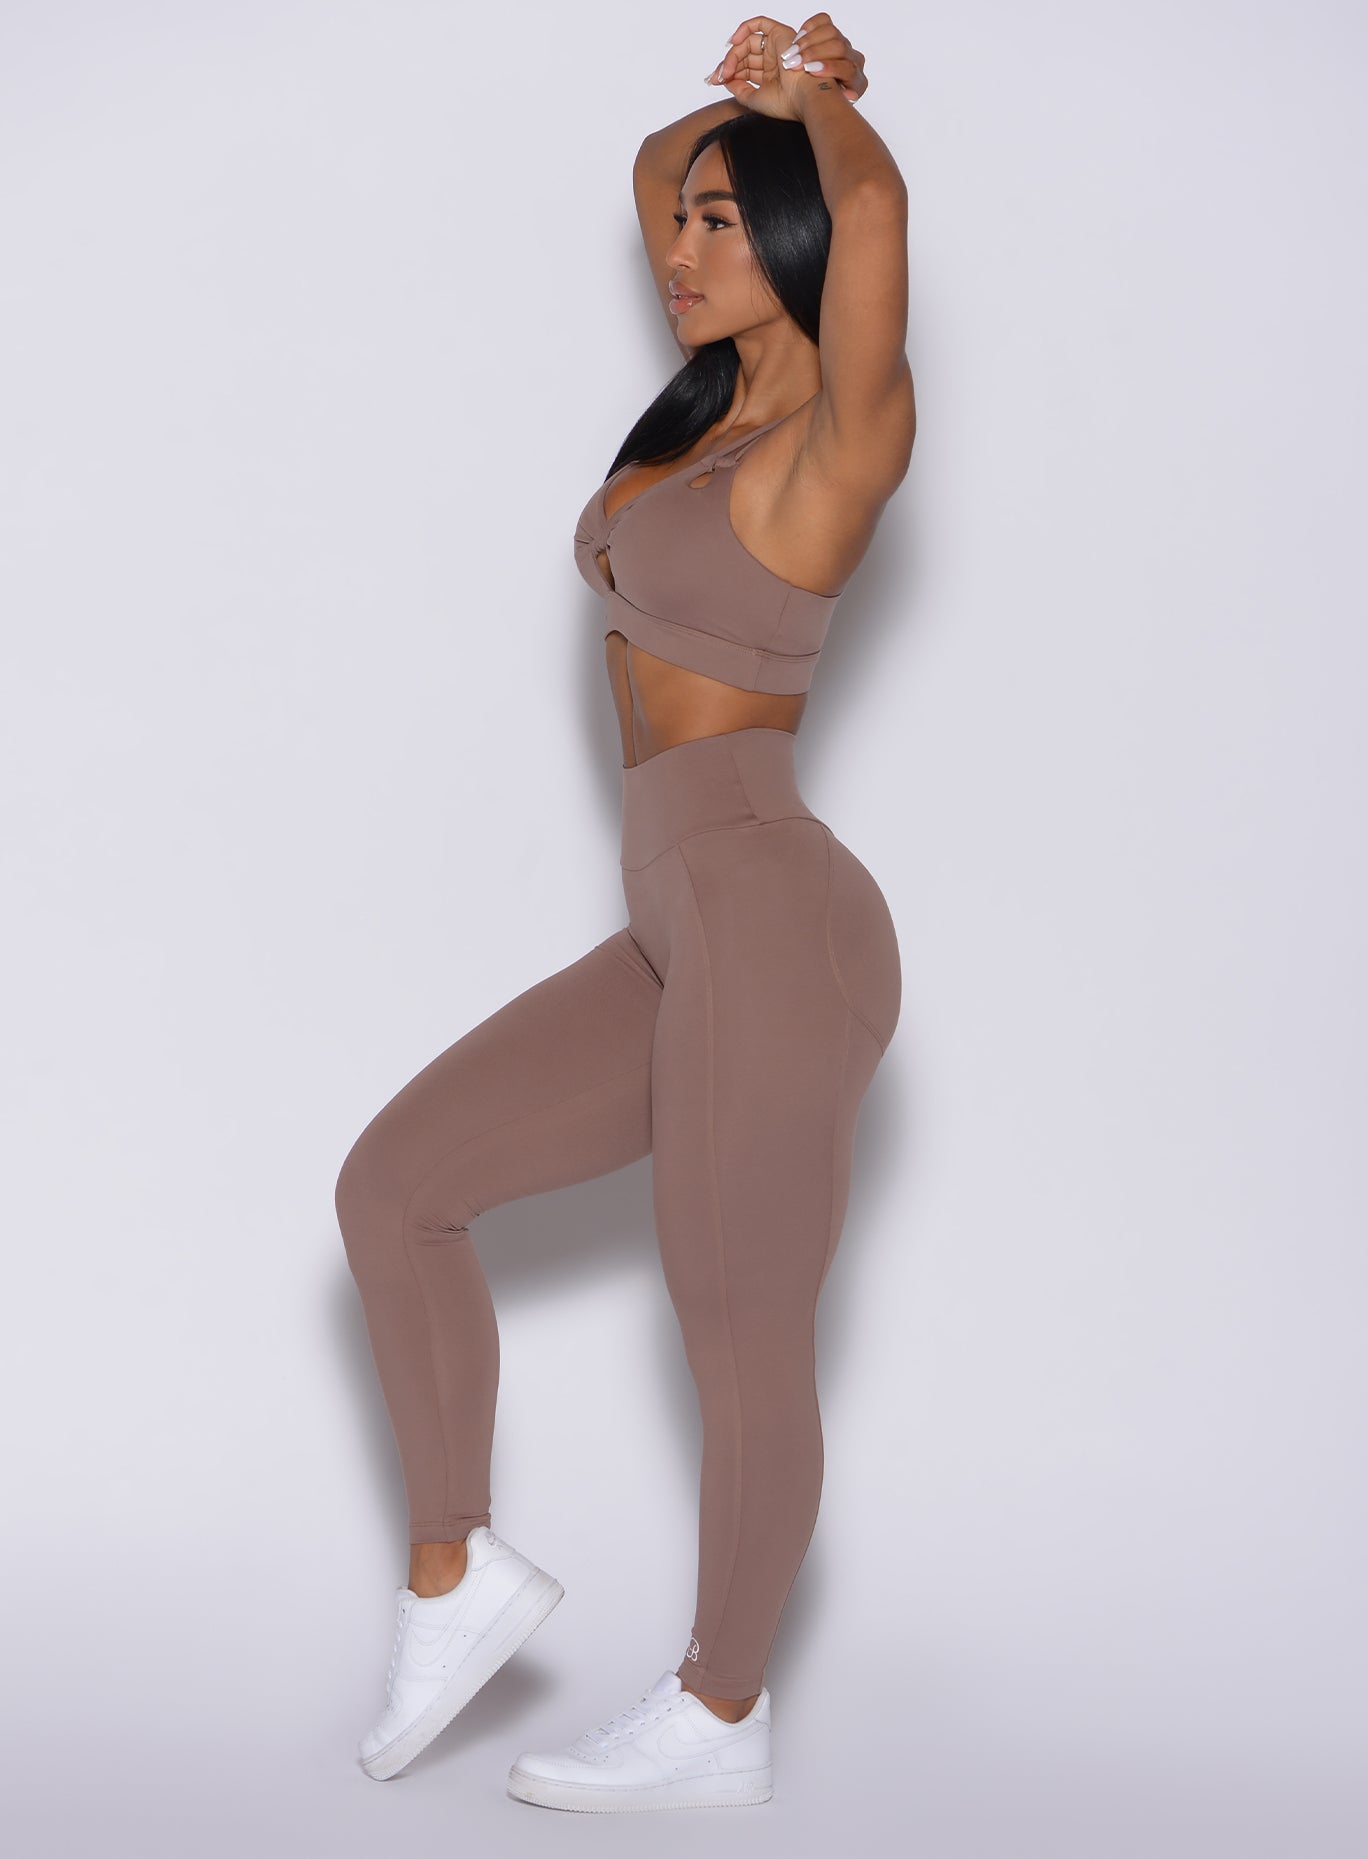 Left side profile view of a model with both her hands over her head wearing our new and enhanced shape leggings in tan color and a matching bra